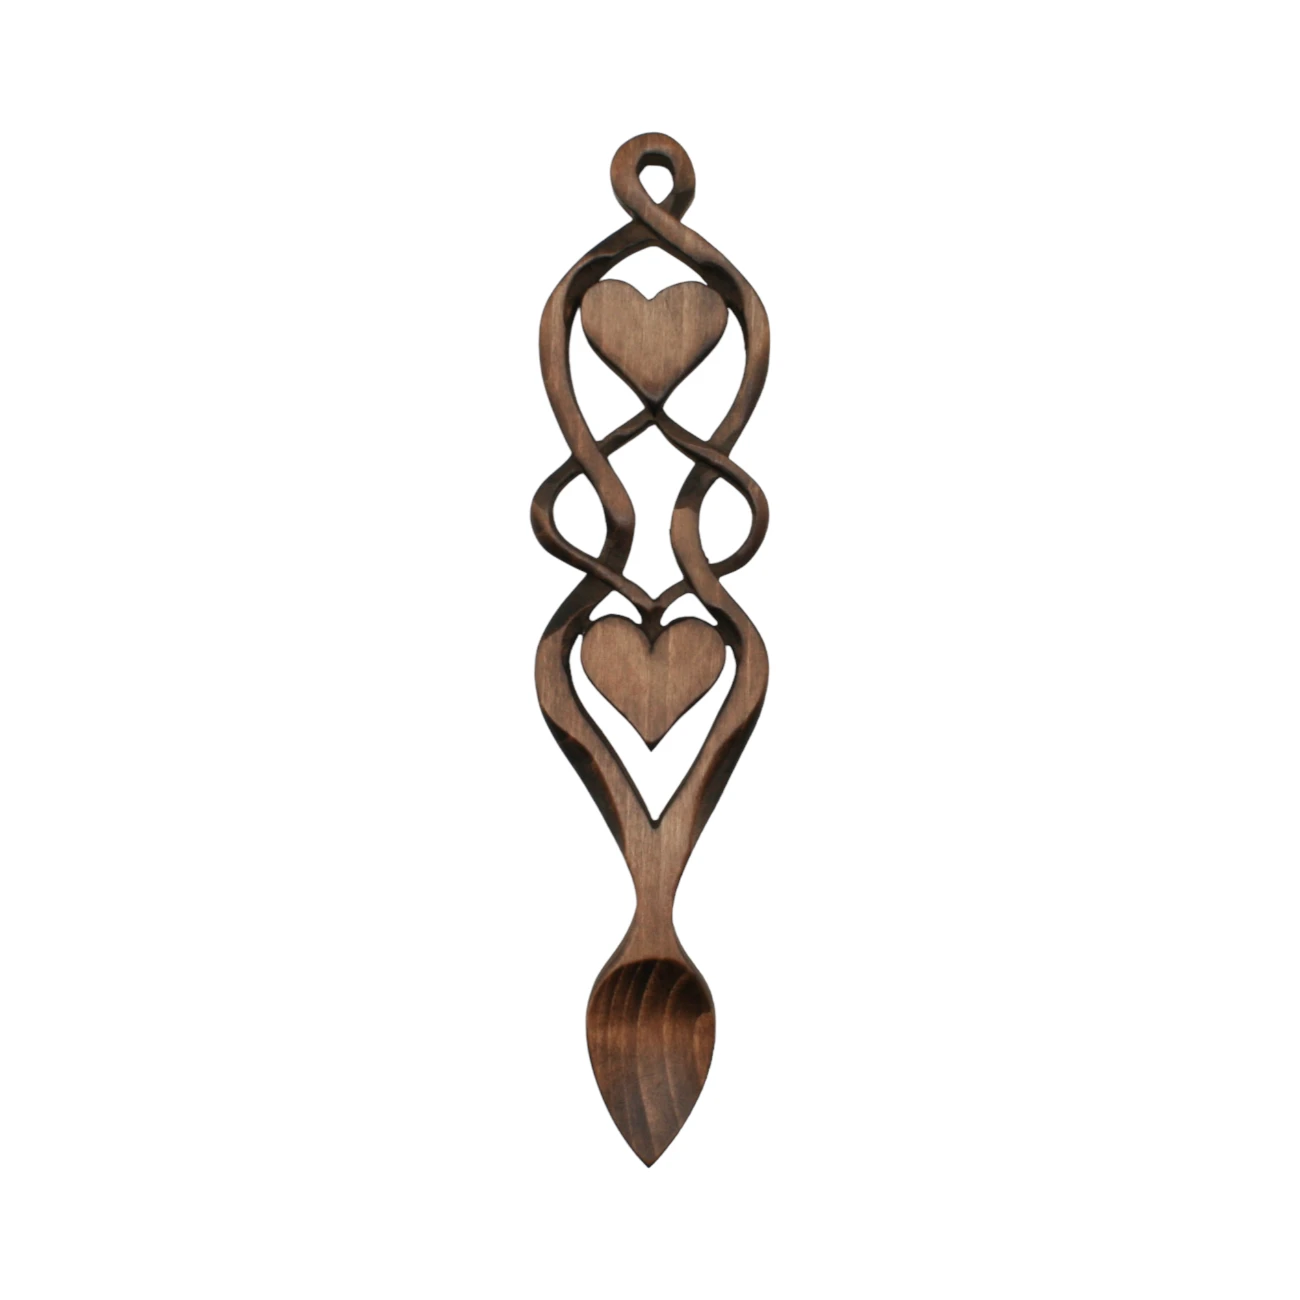 An image of a lovespoon titled Hearts on Knots (2)